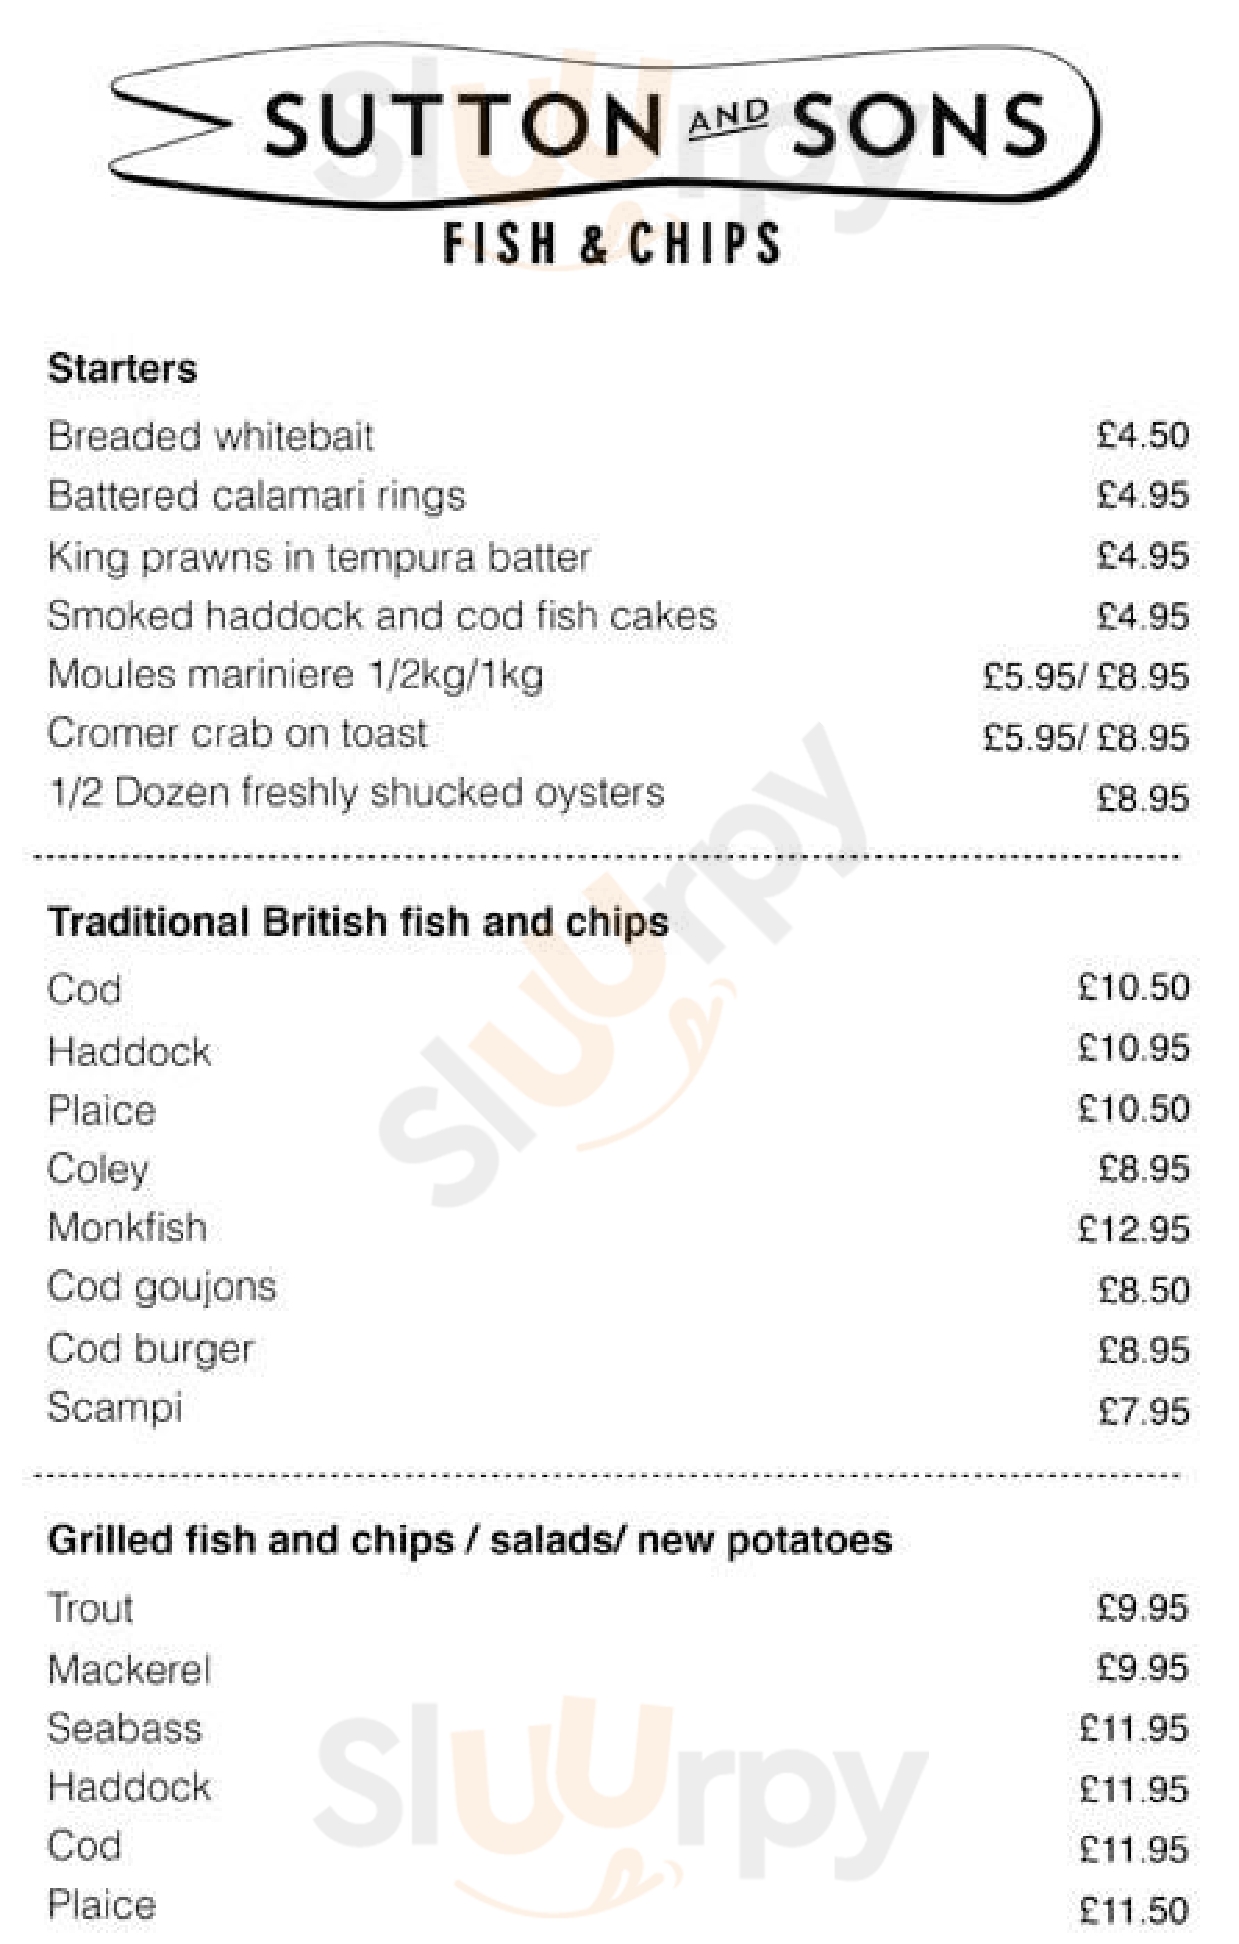 Sutton And Sons Fish & Chips London Menu - 1